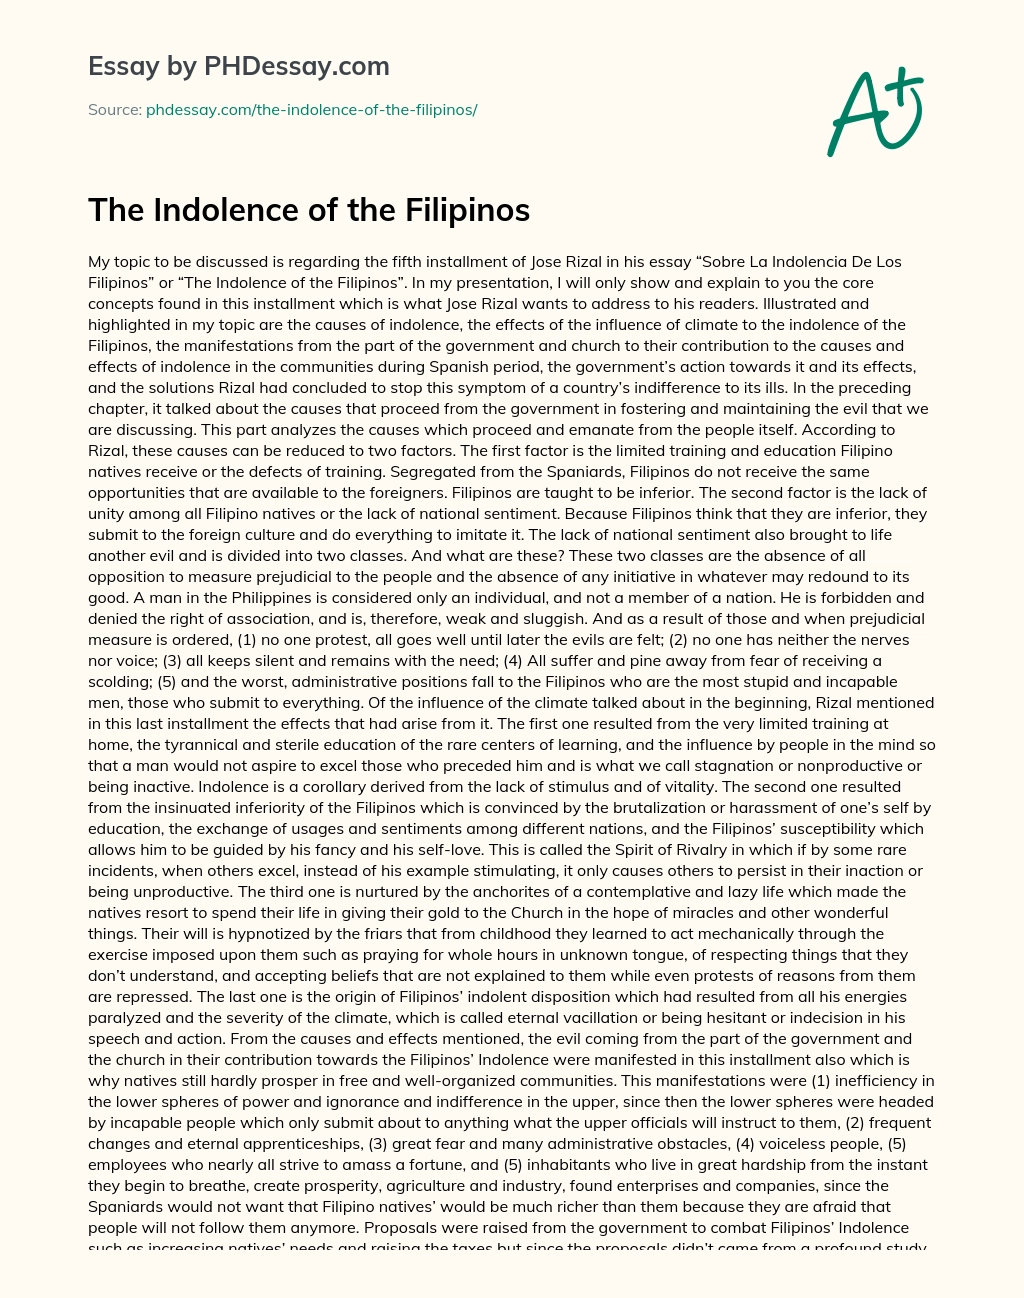 The Indolence of the Filipinos essay